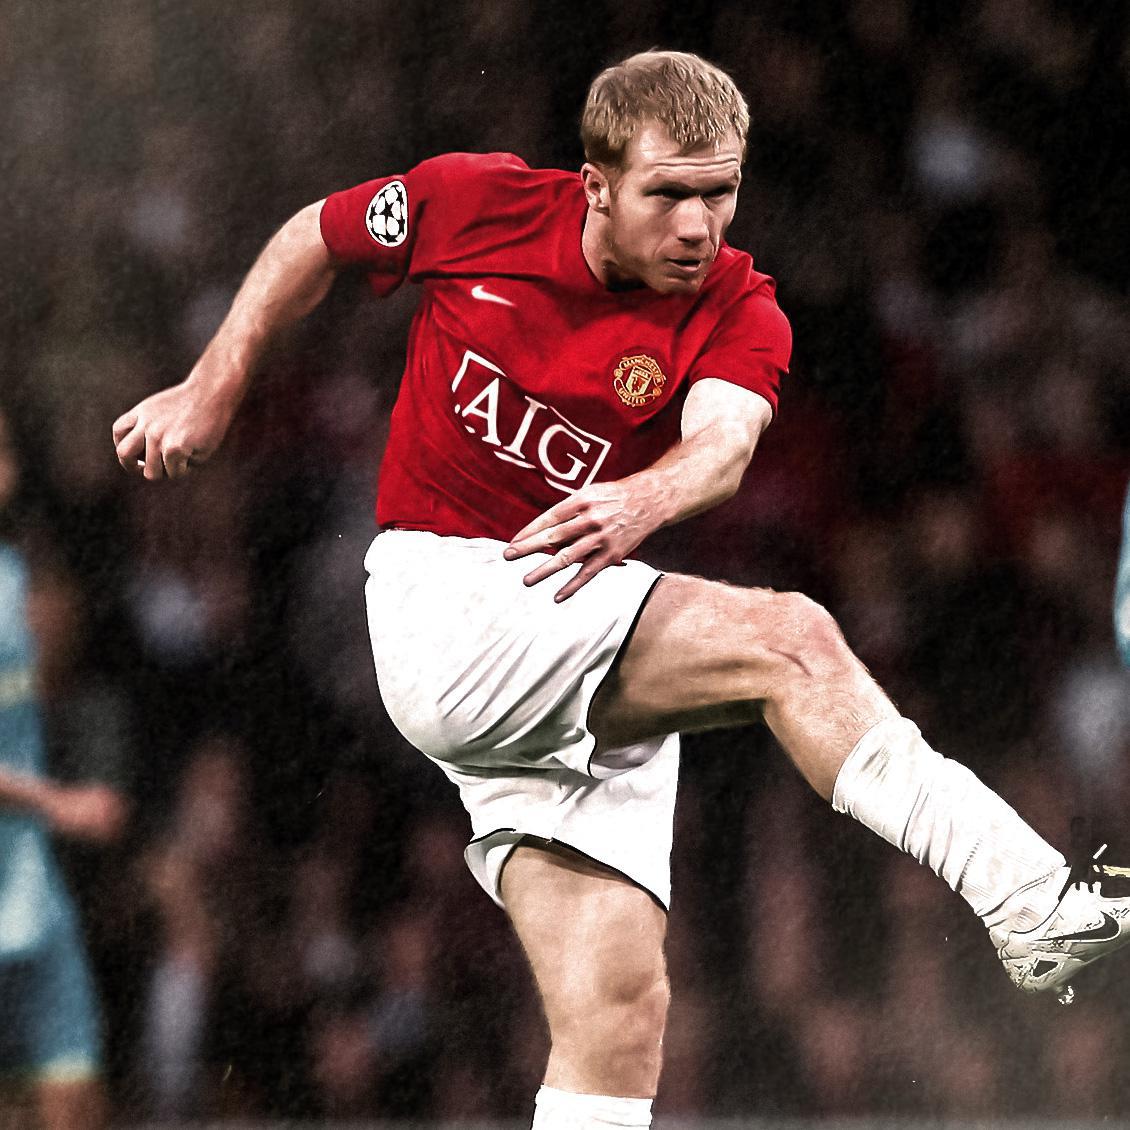 Manchester United's Top 10 Goal Scorers of all time - Paul Scholes